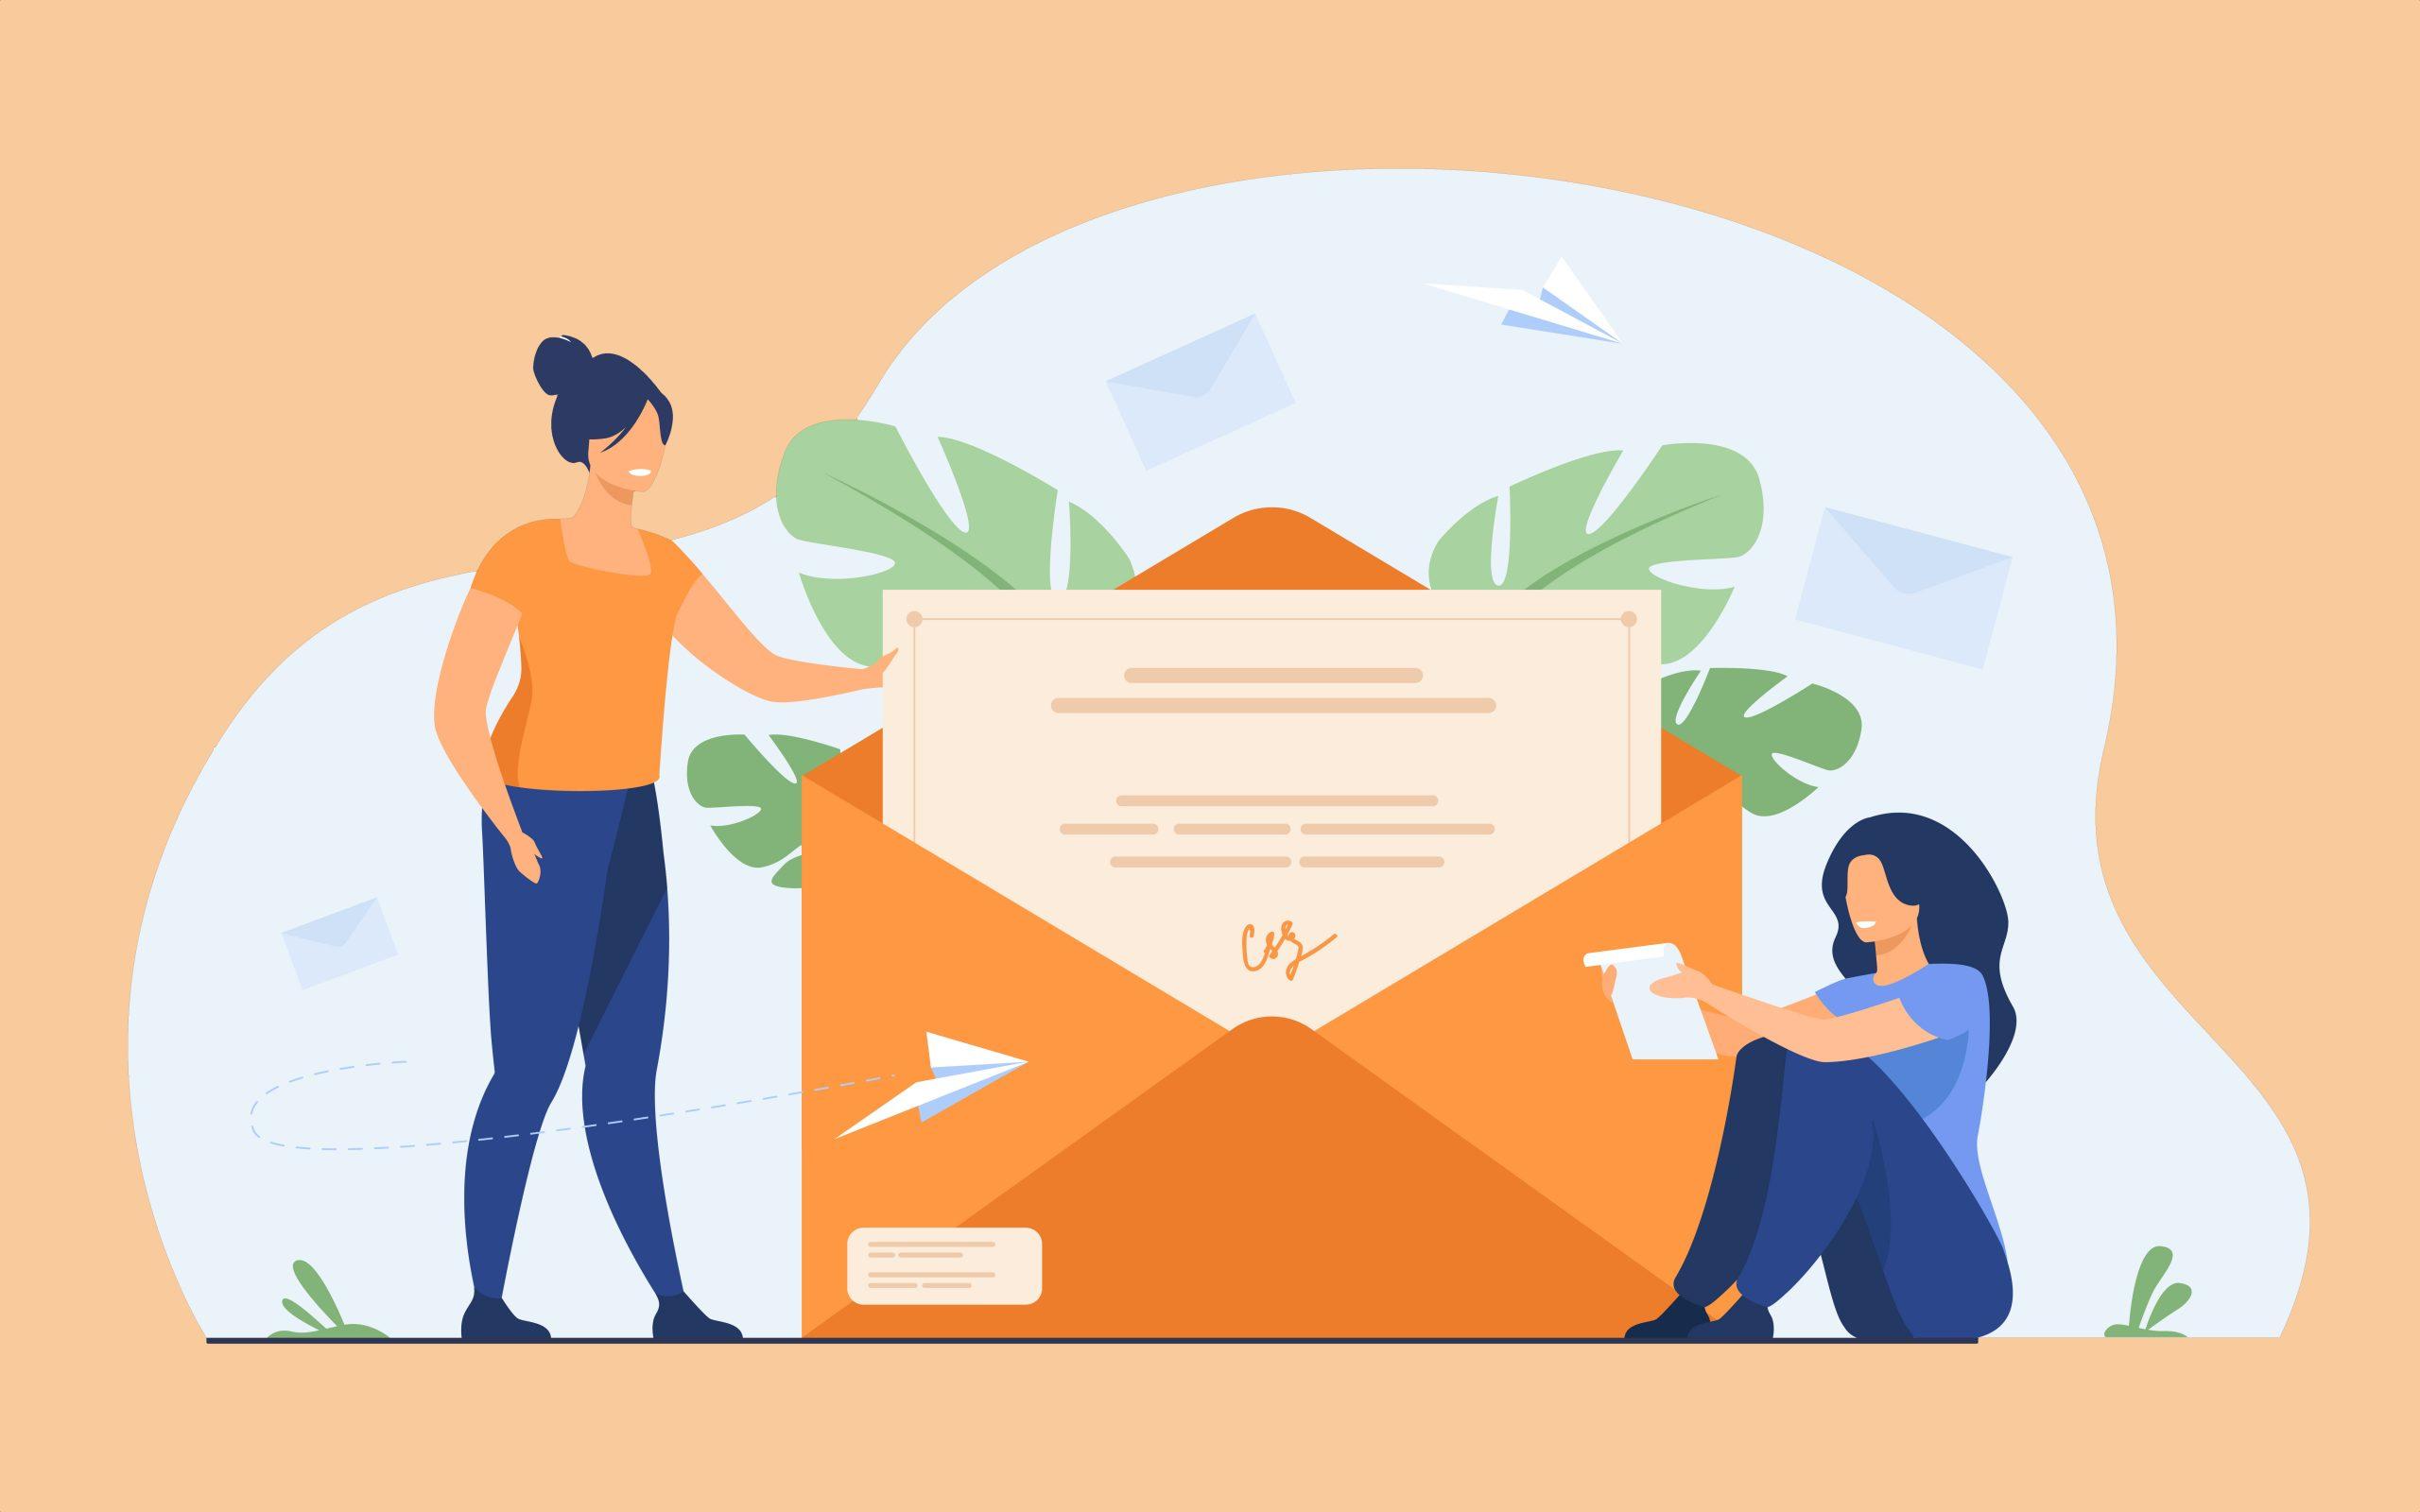 {:en}Email Marketing in Simple Words: A Step-by-Step Guide{:}{:ru}Про email-маркетинг простыми словами: пошаговое руководство{:}